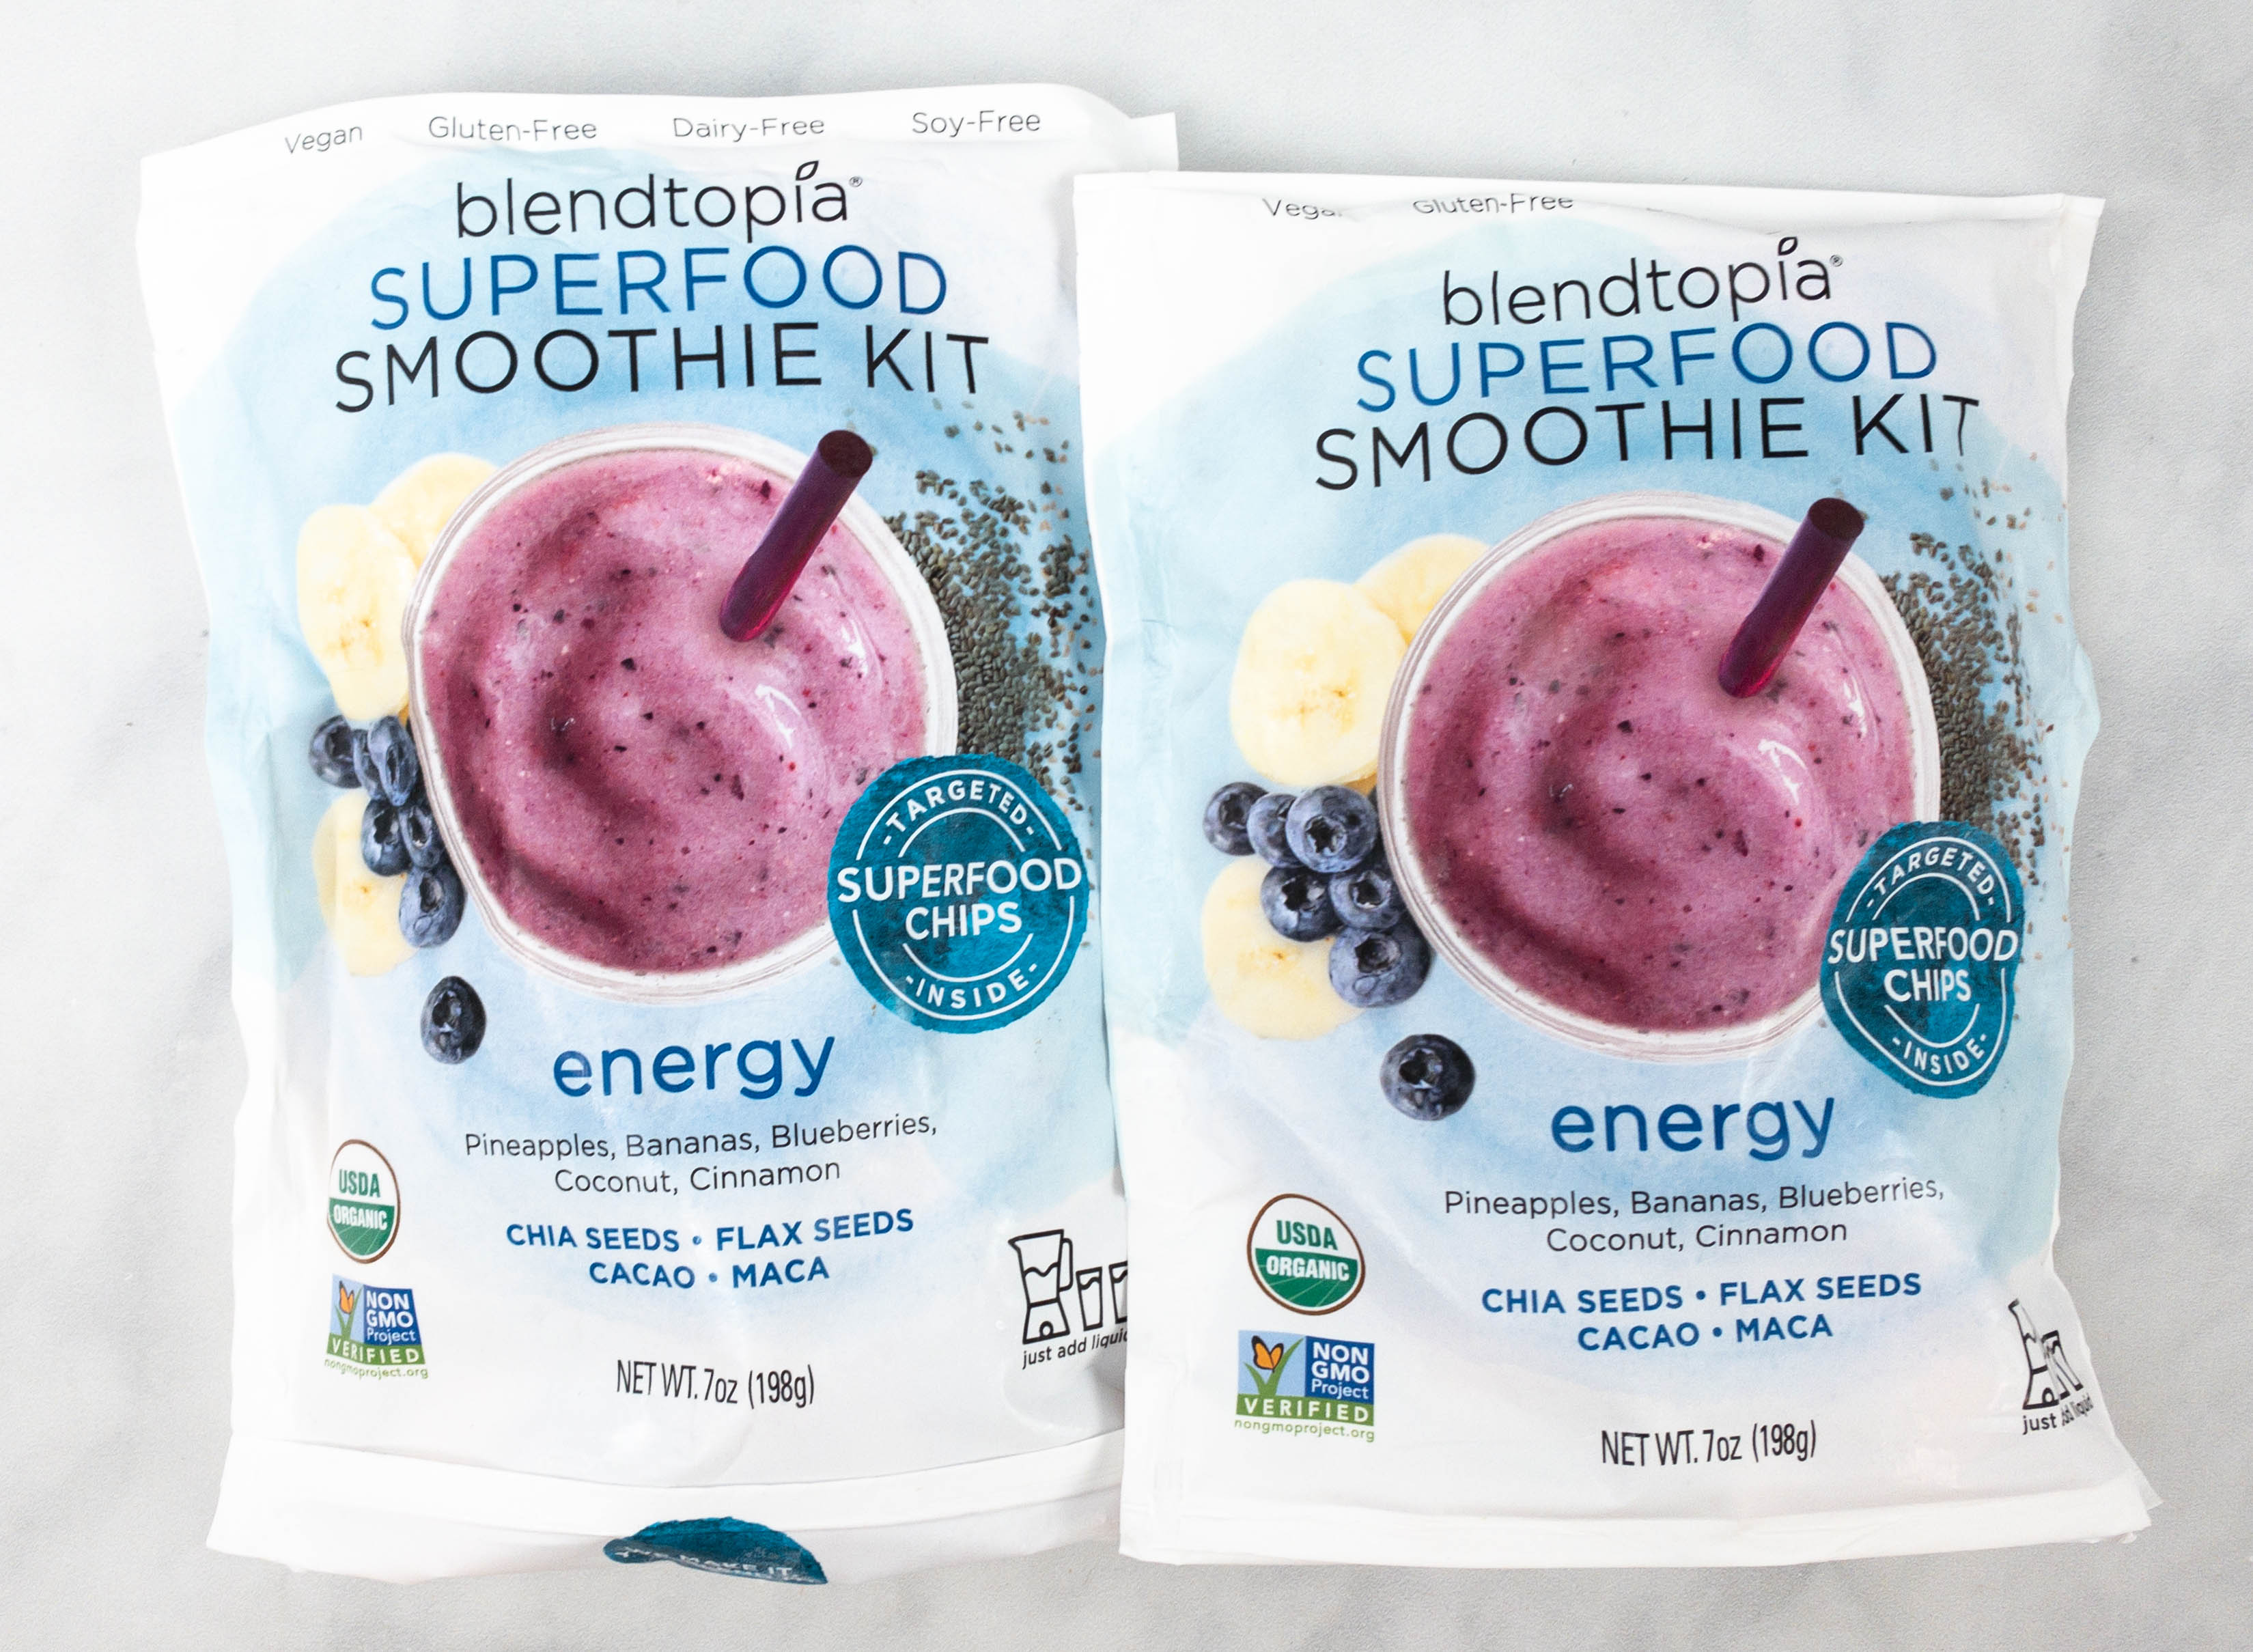 https://hellosubscription.com/wp-content/uploads/2021/03/blendtopia-superfood-smoothie-kit-9.jpg?quality=90&strip=all